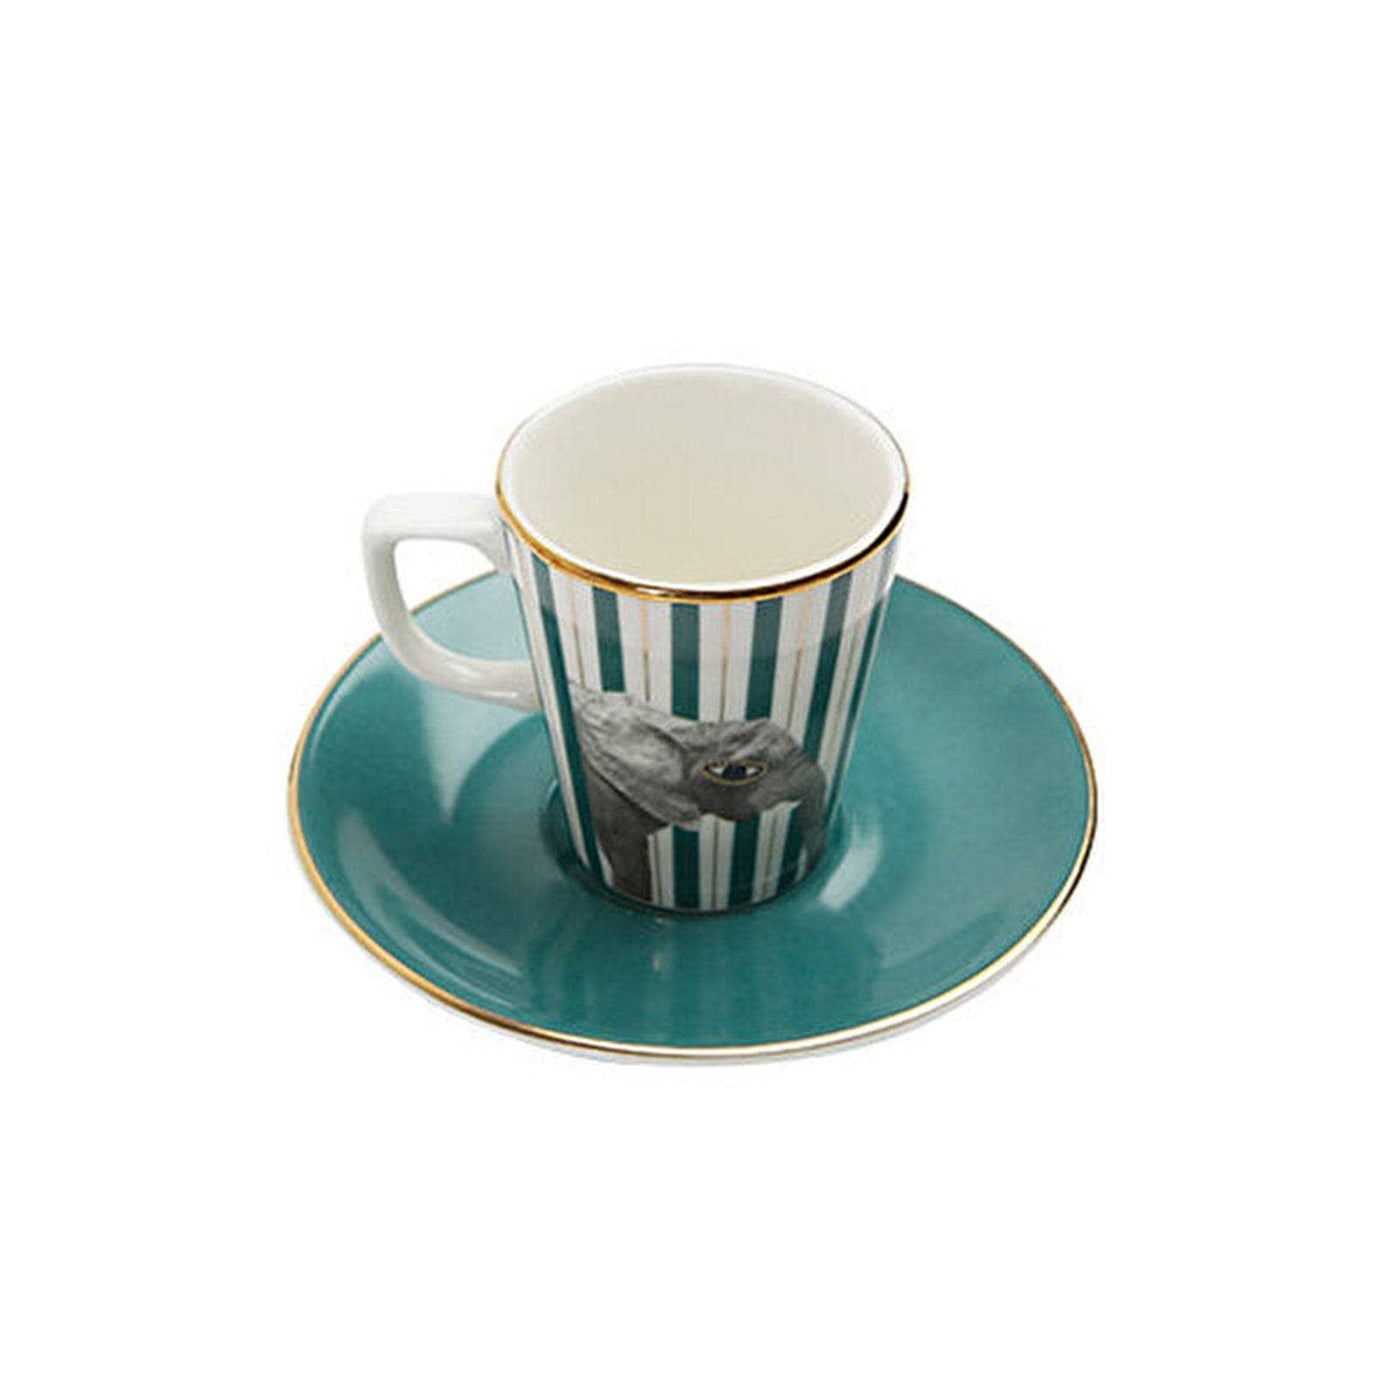 Wild Life Set of 6 Elephant Espresso Cups and Saucers, Green, 75 ml 2